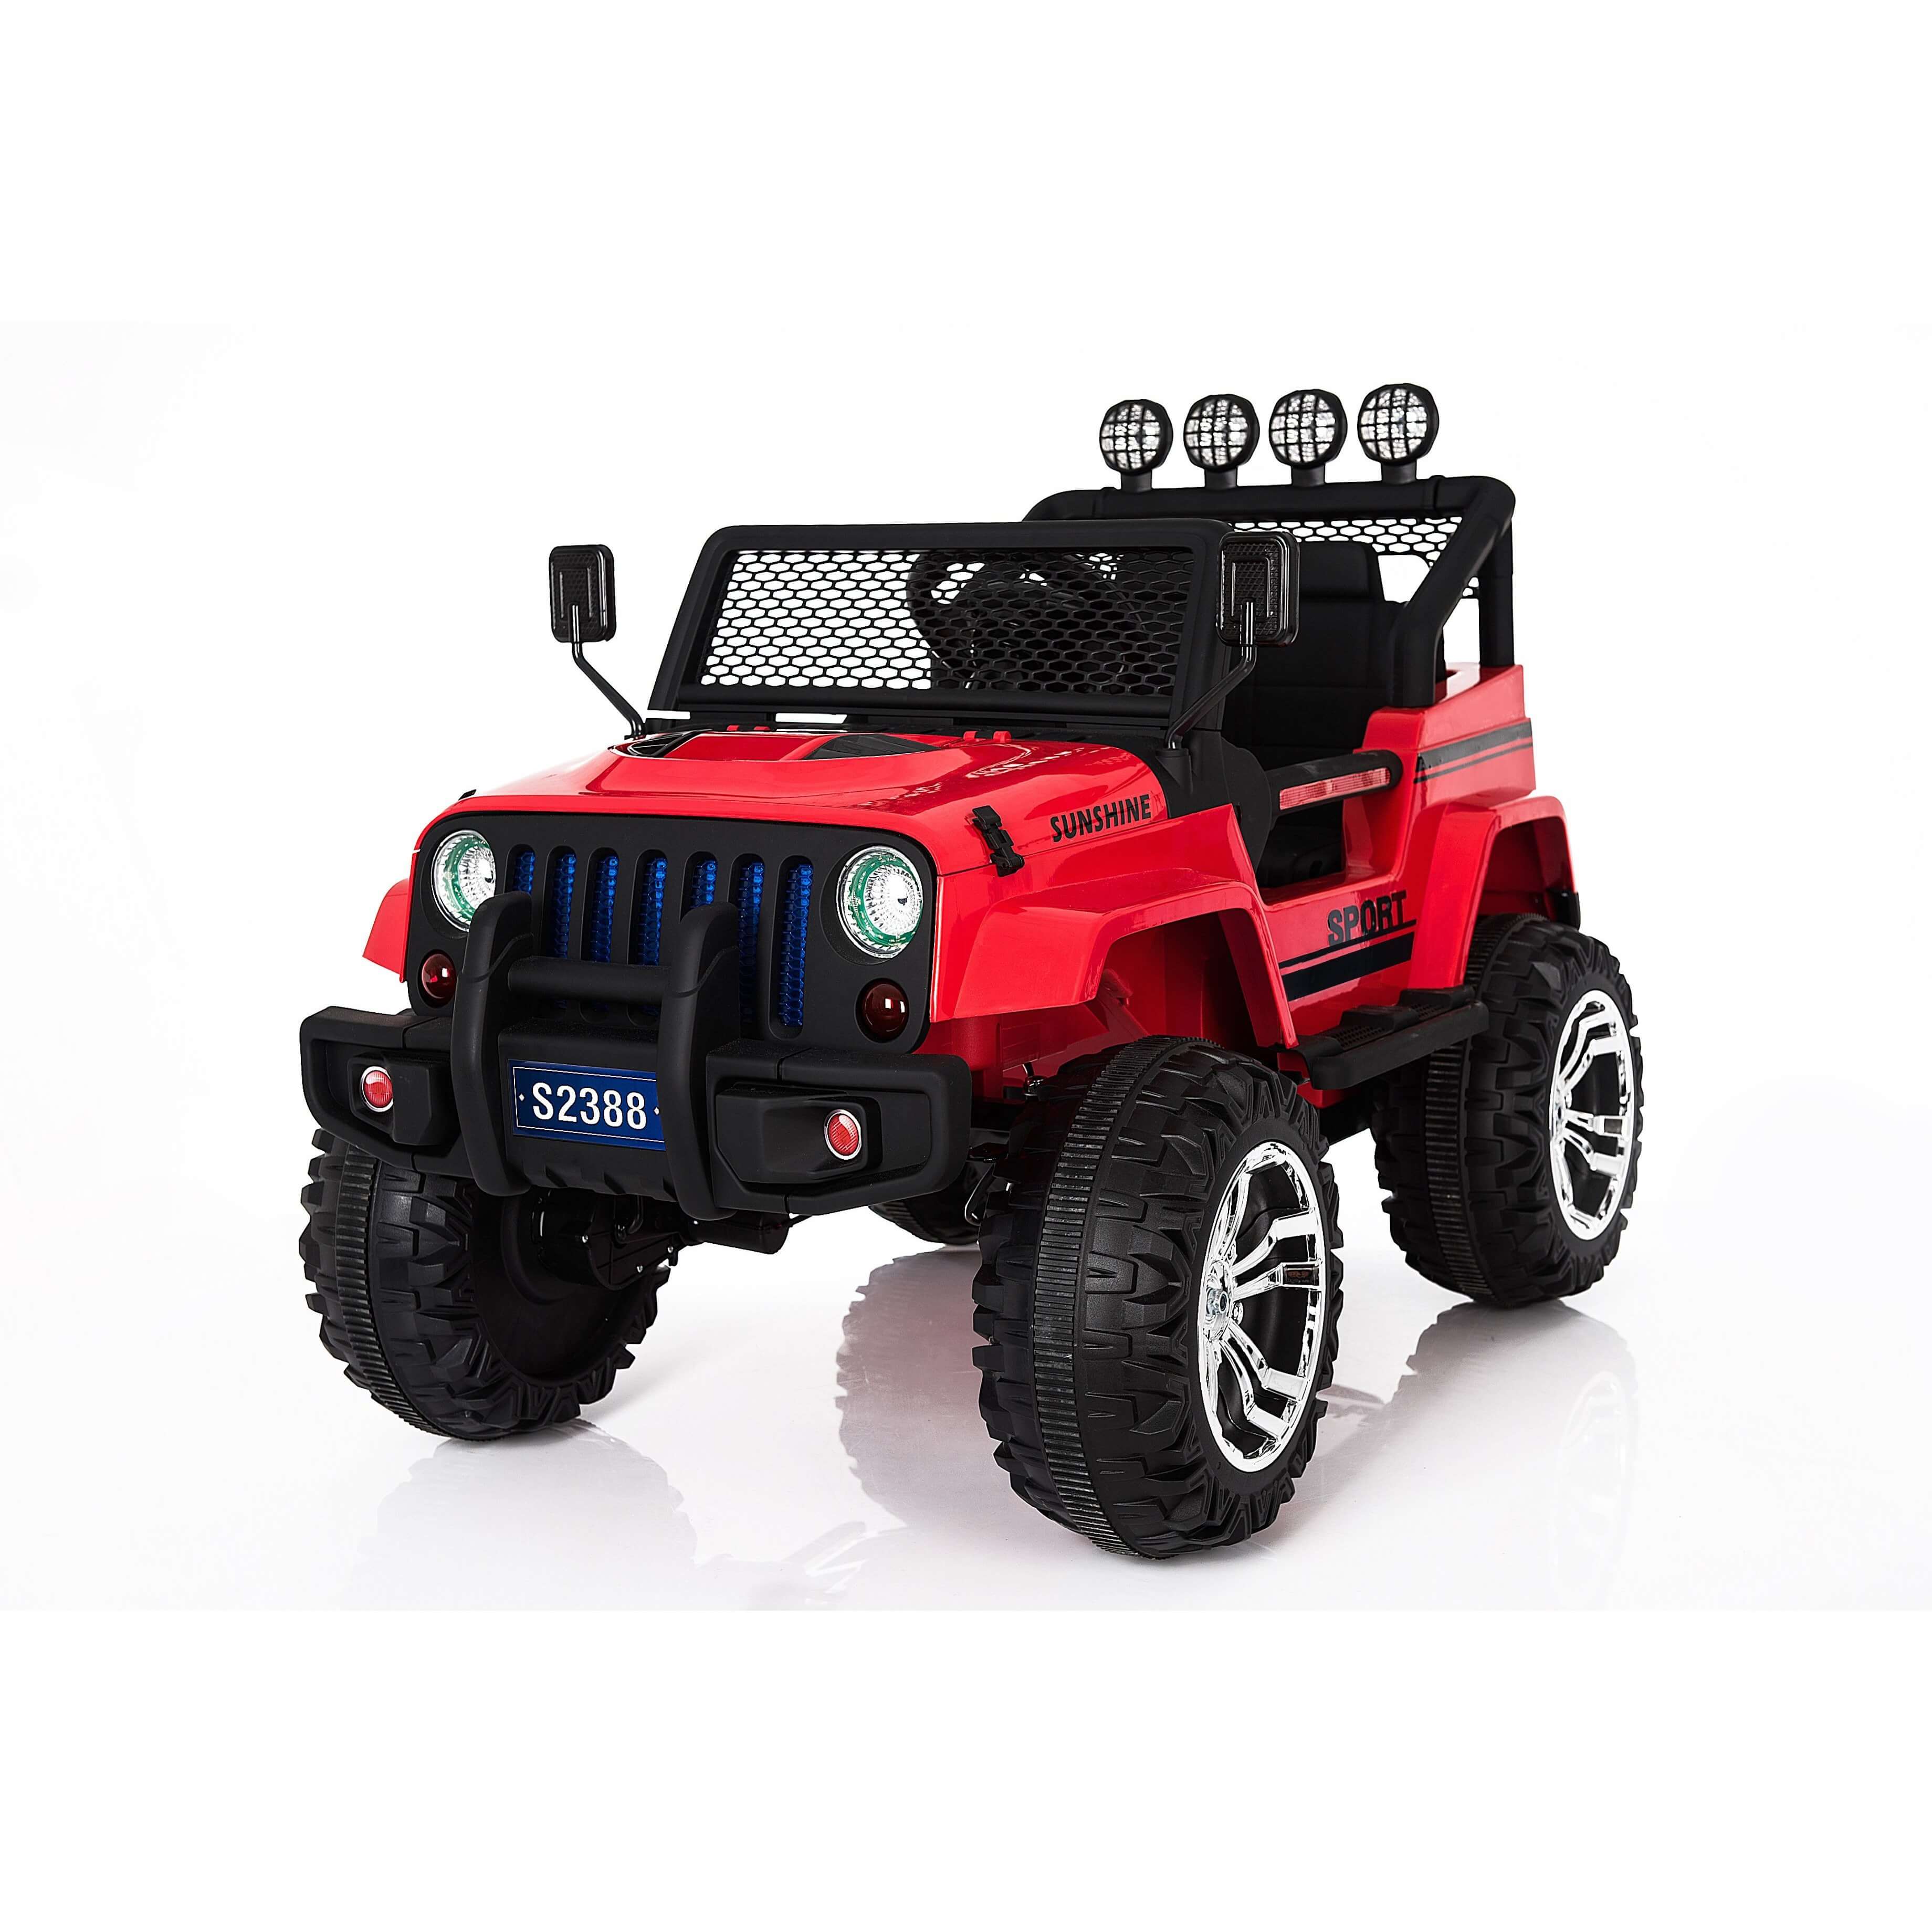 Red Ride on SUV Wrangler Style 2-Seats Jeep For kids 12V